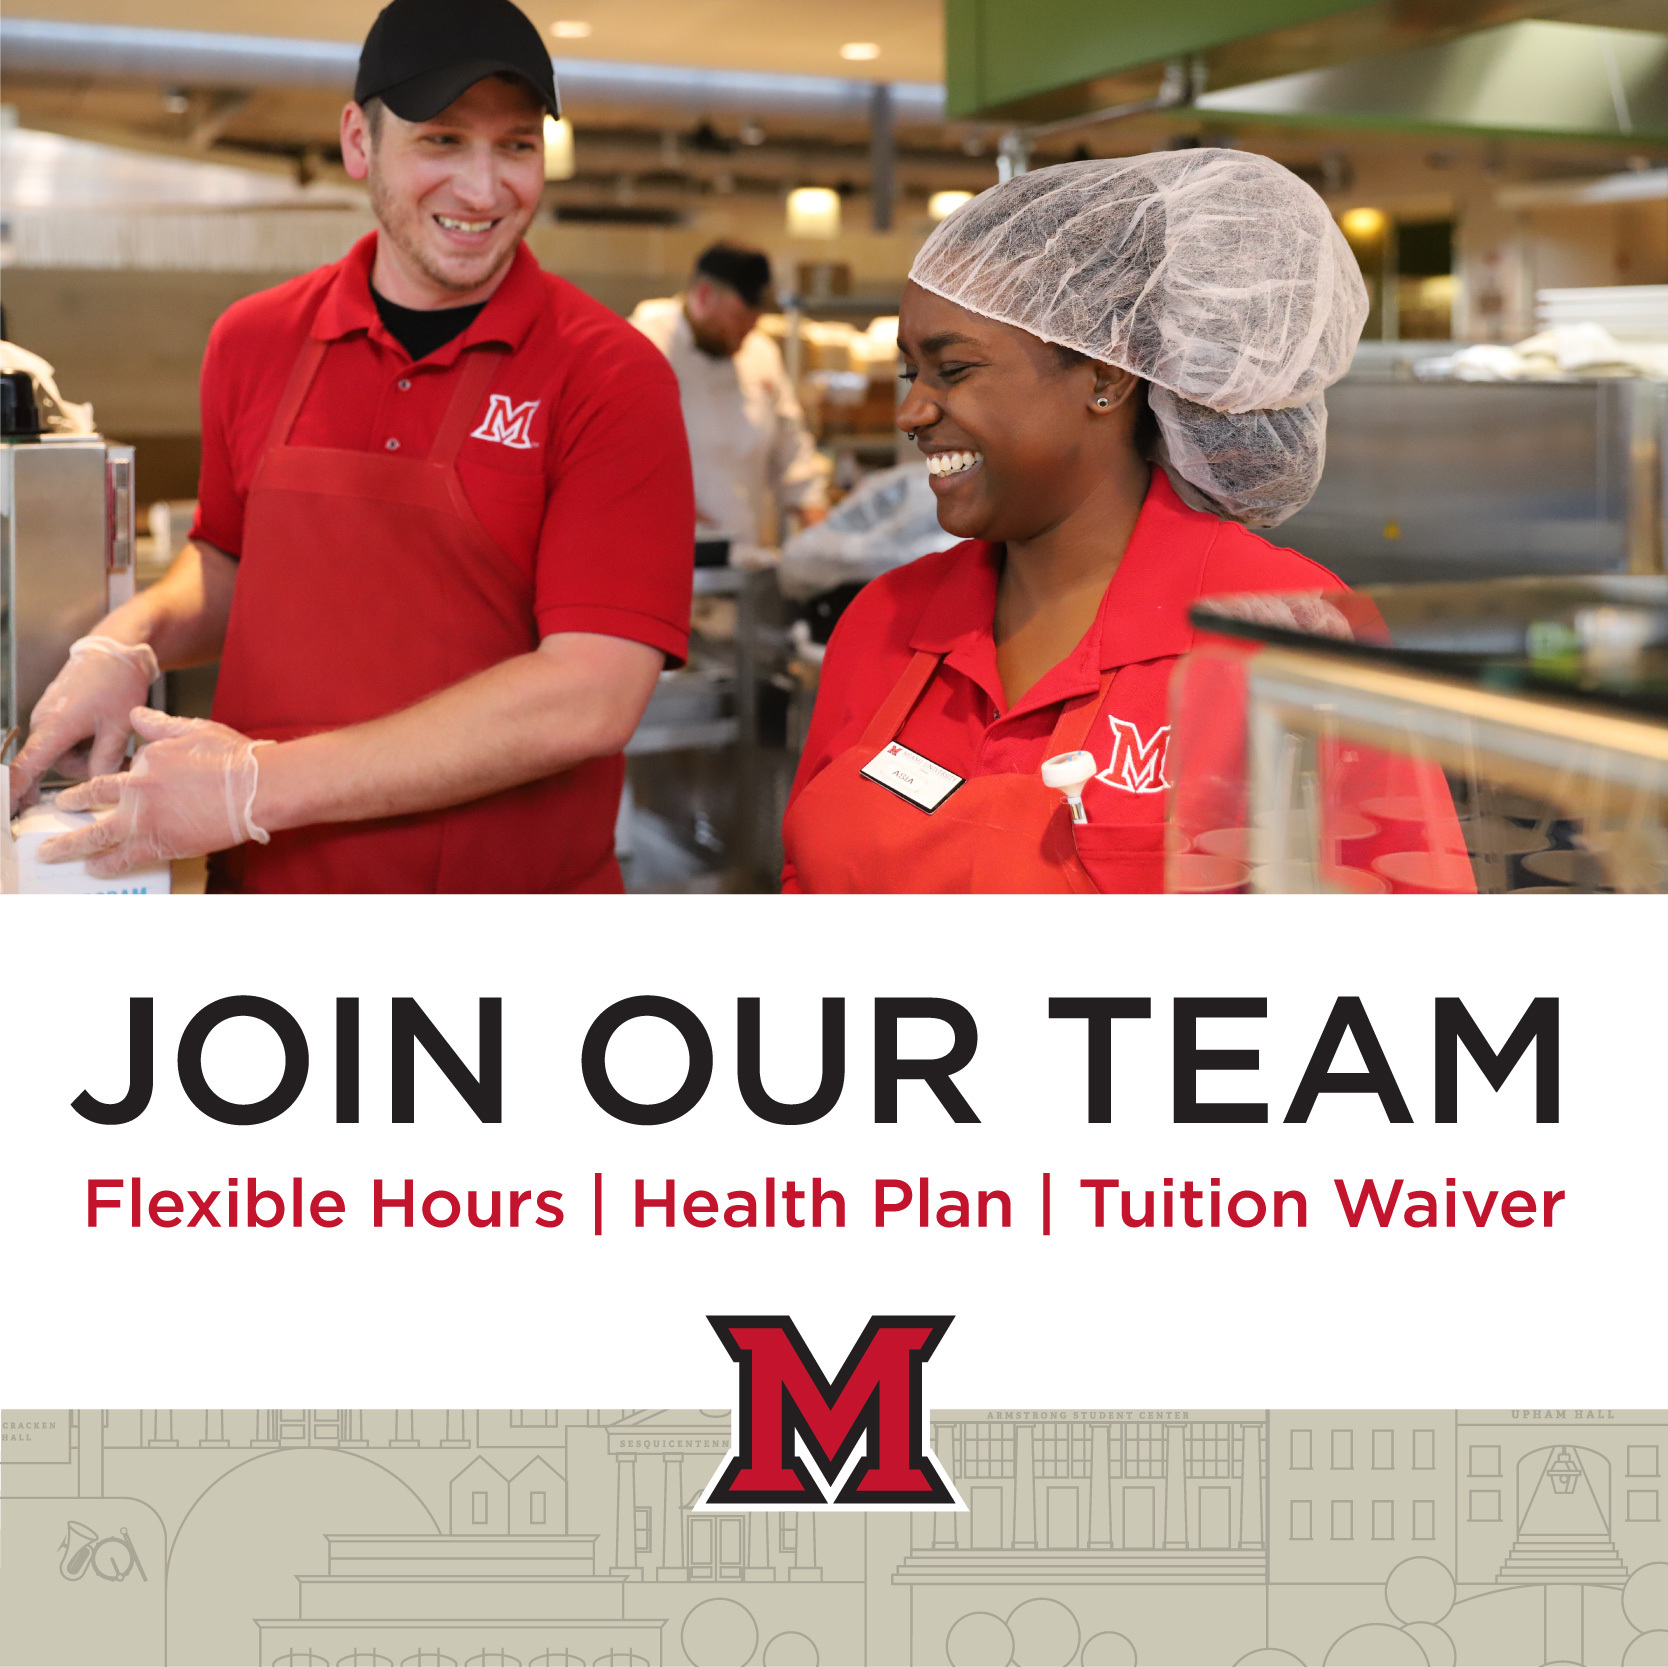  Join our team. Flexible hours, tuition waiver